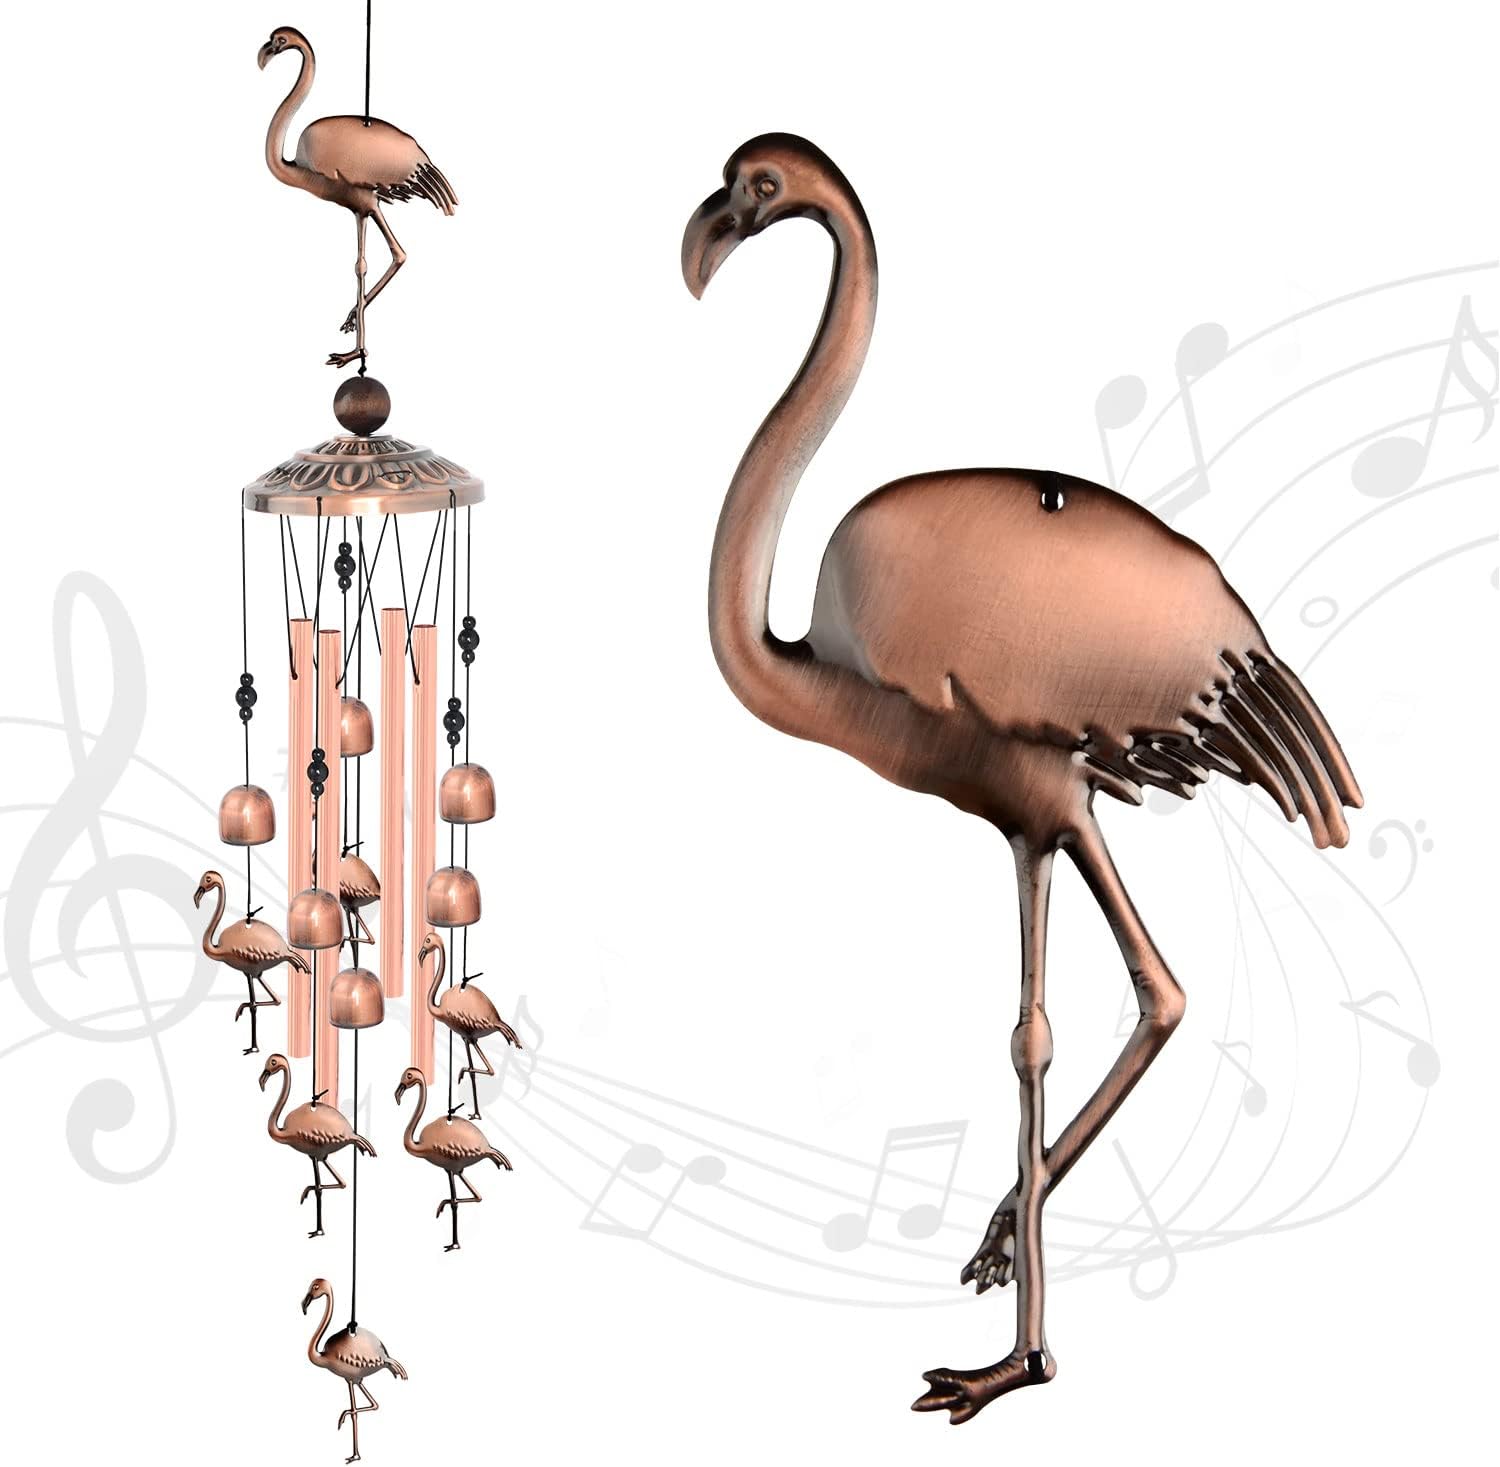 Flamingo Wind Chimes Flamingo Gifts for Women Birthday Gift Women Valentine' Day for Wife Flamingo Gift Mother Birthday Gift Mom Gifts from Daughter,Grandma Gifts Flamingo Outdoor Gifts for Women 